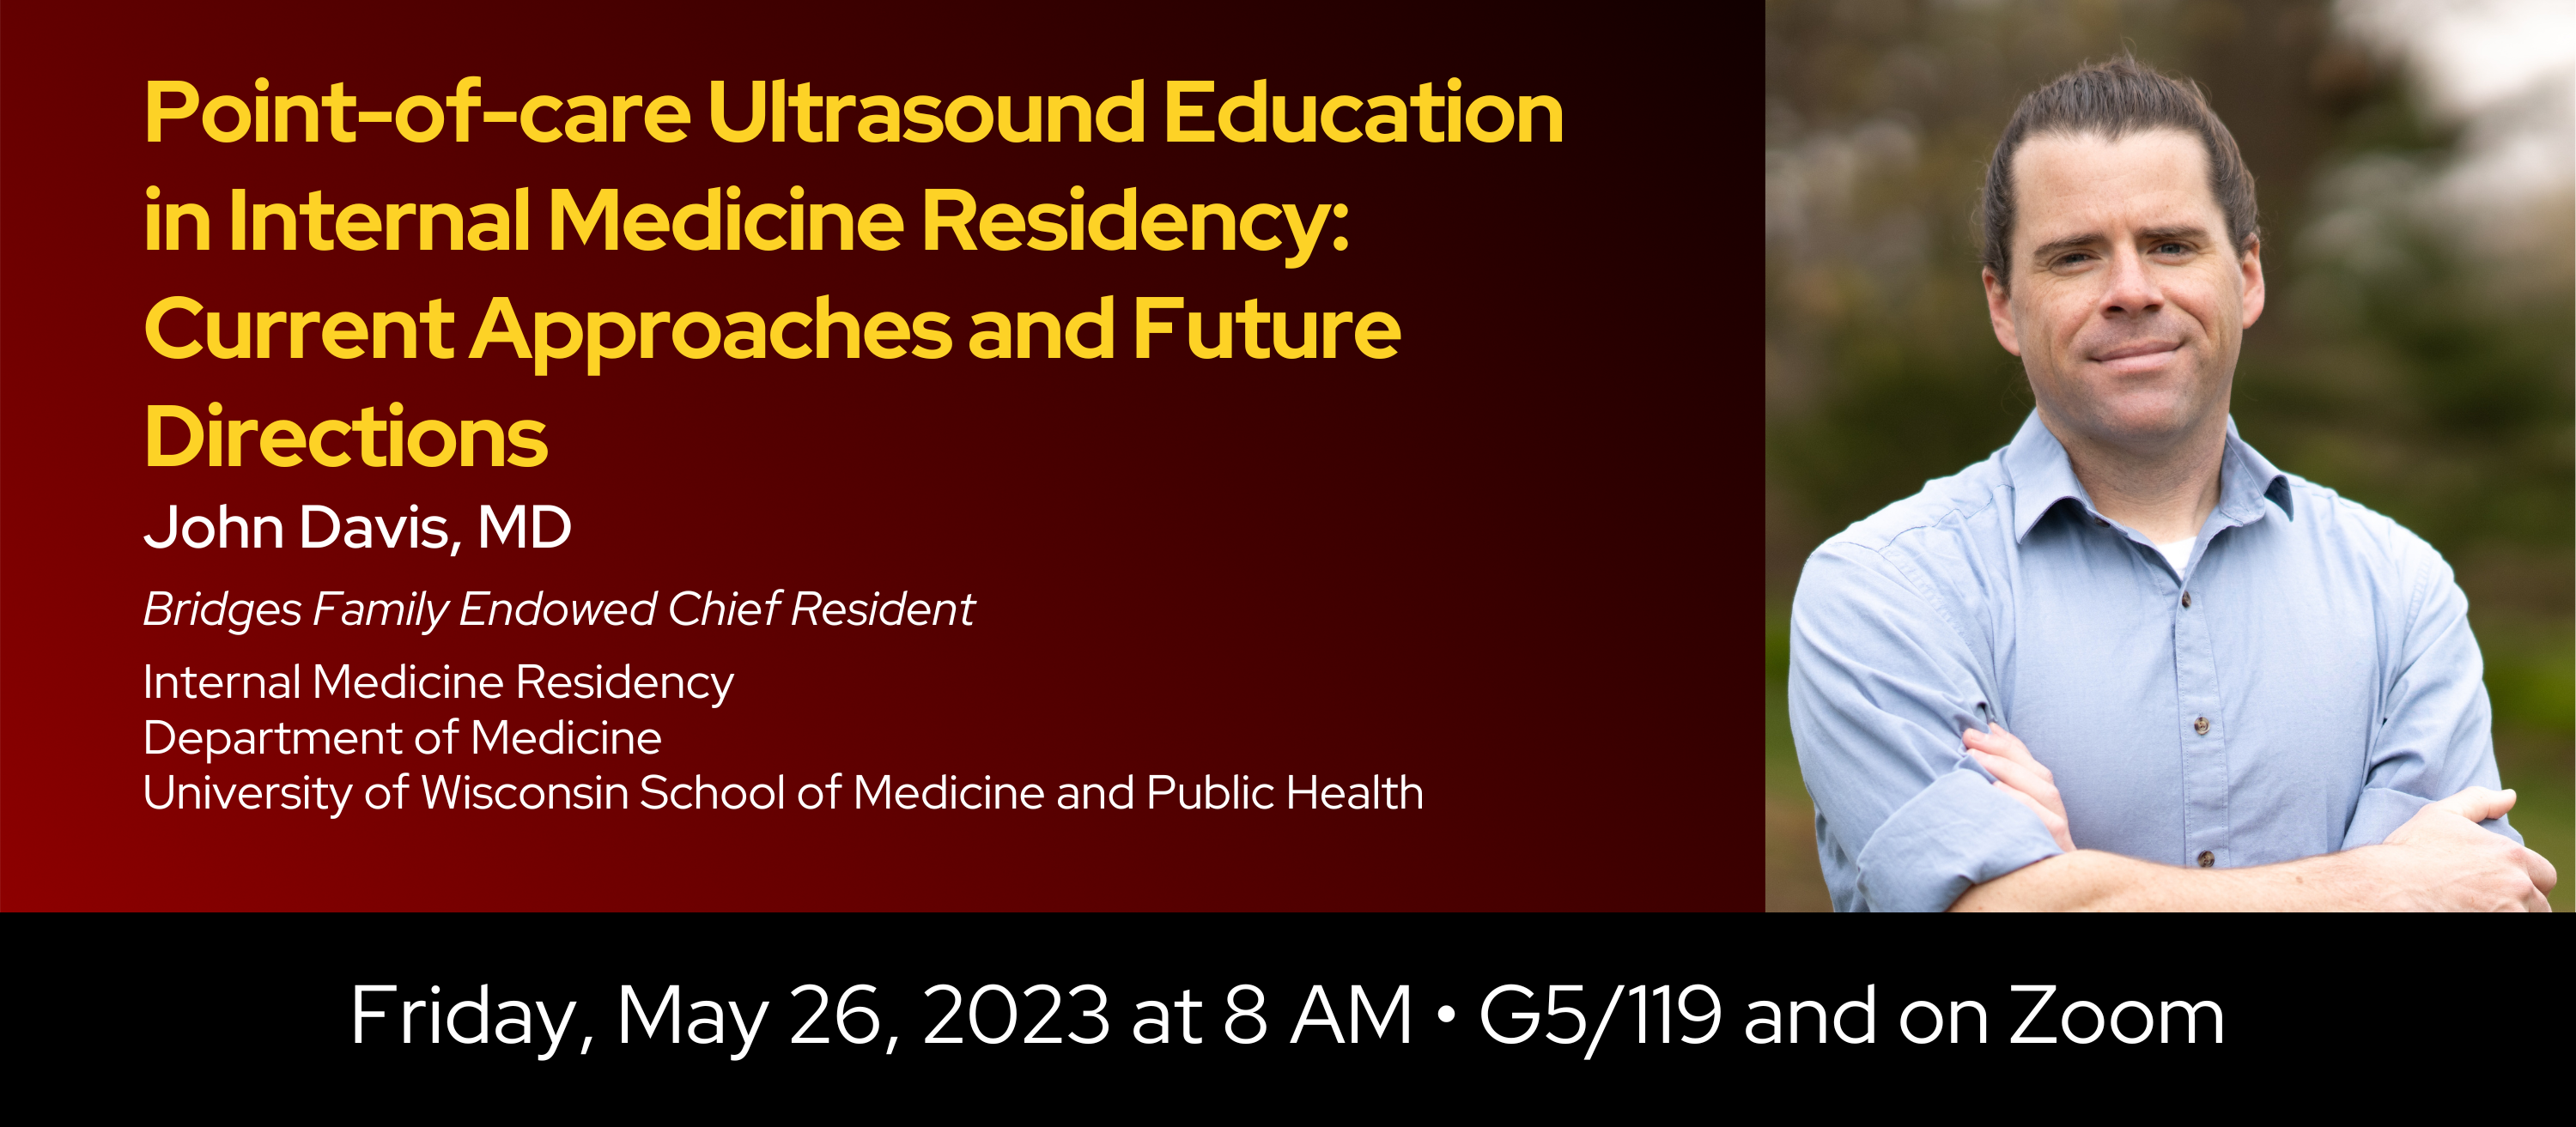 Title: Point-of-care Ultrasound Education in Internal Medicine Residency: Current Approaches and Future Directions